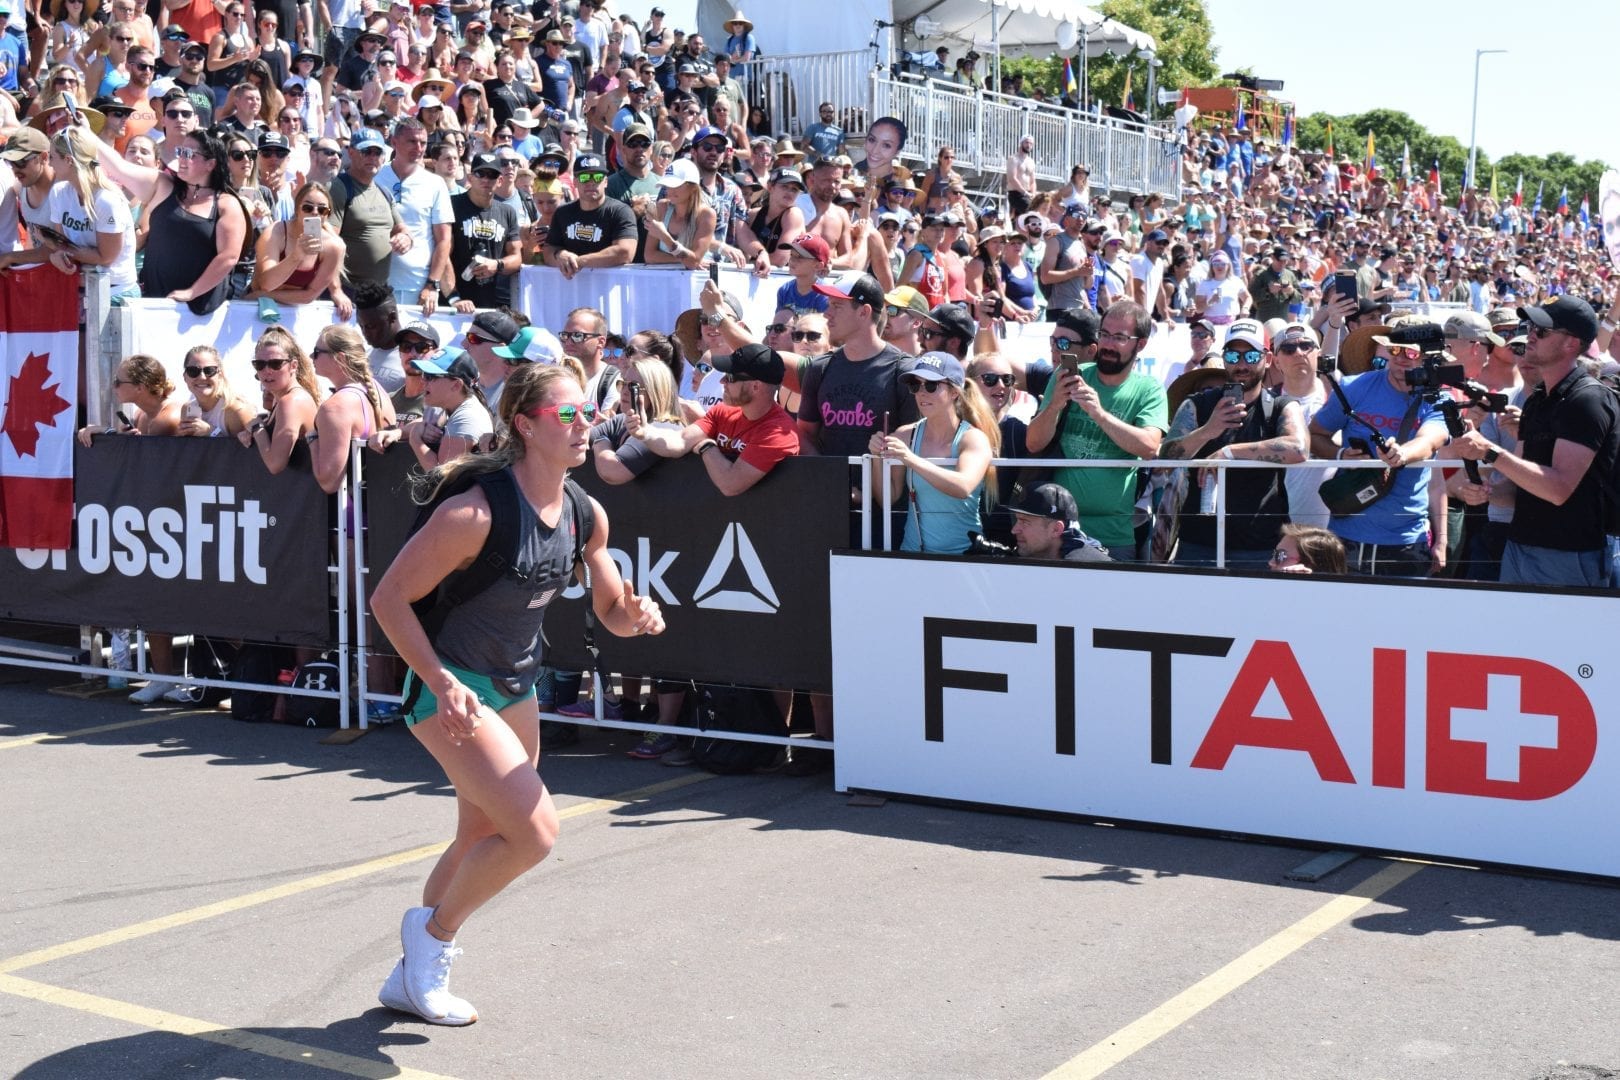 Brooke Wells completes the Ruck Run event at the 2019 CrossFit Games